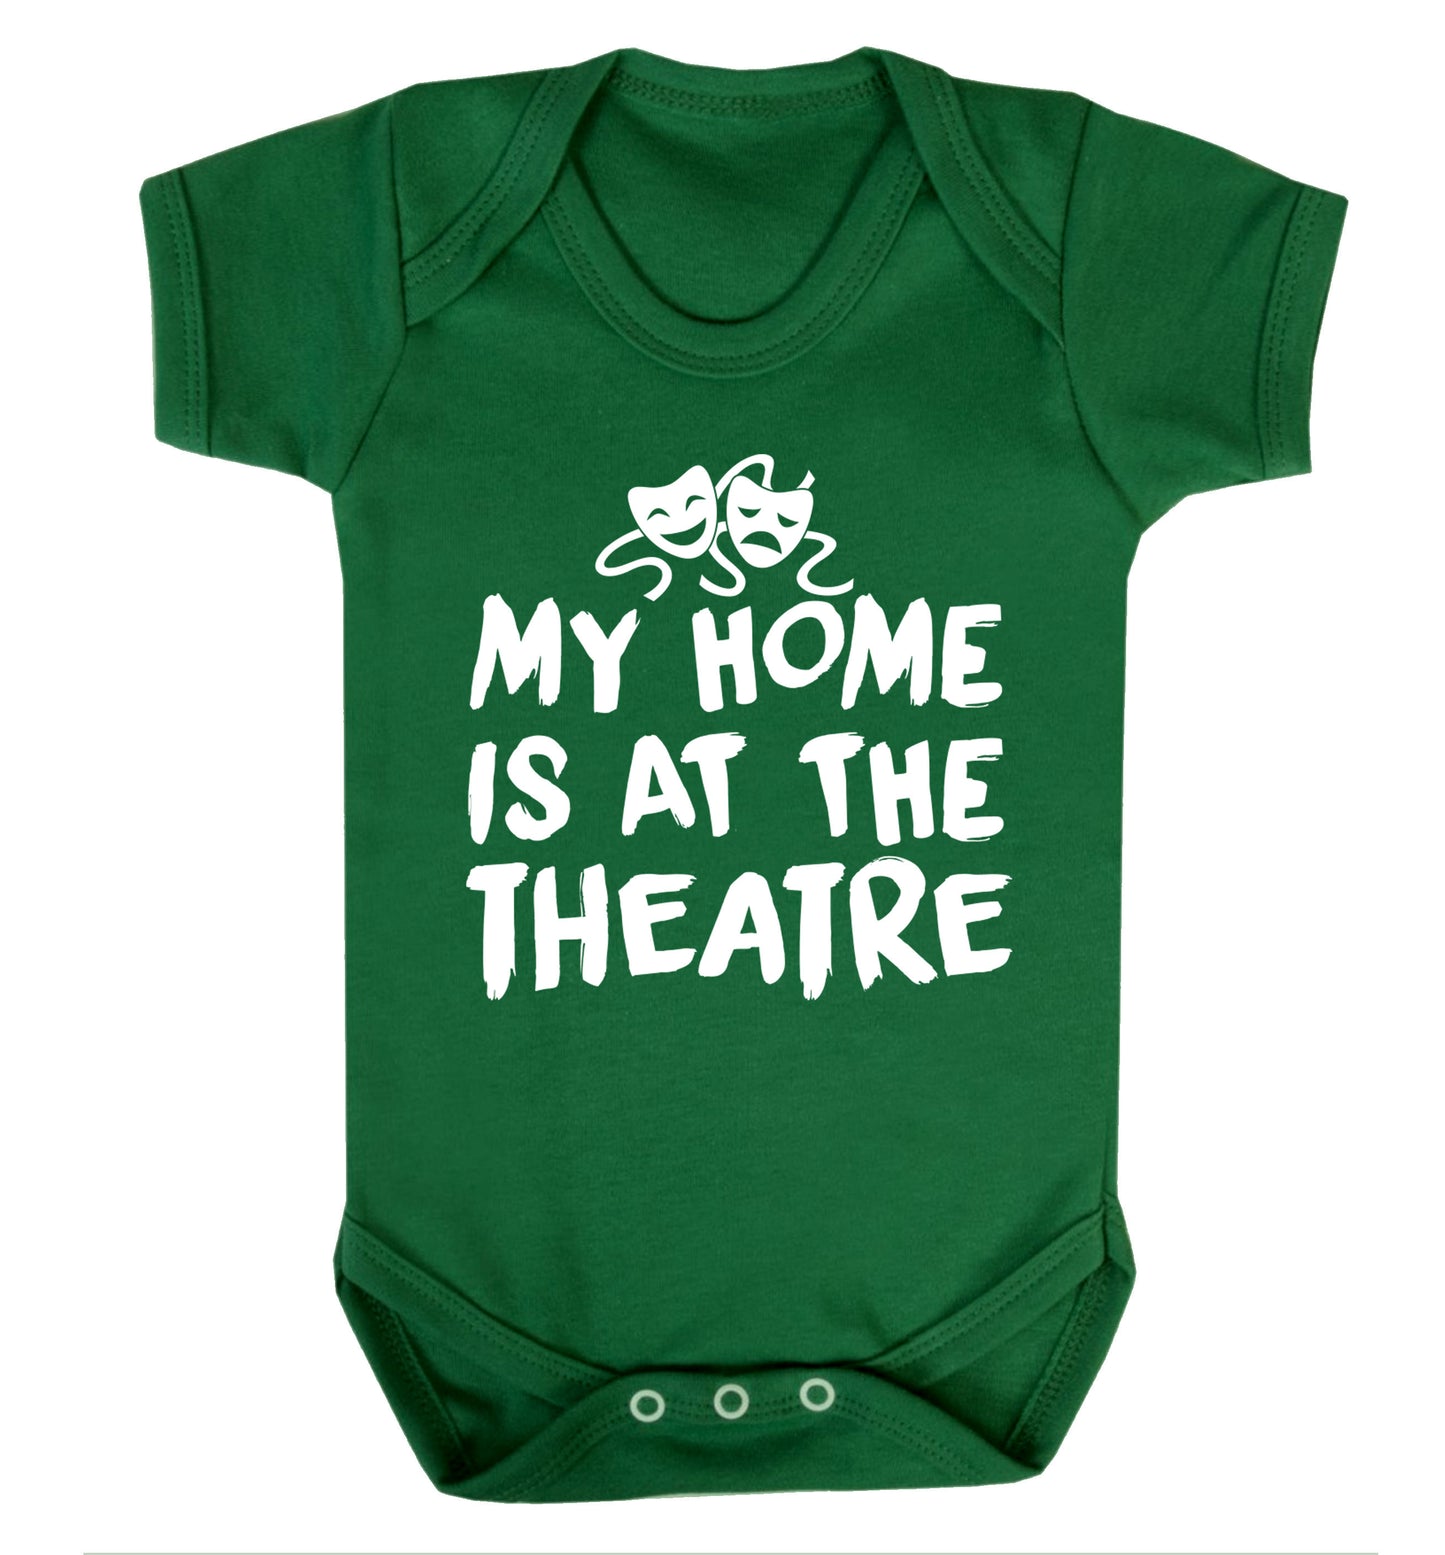 My home is at the theatre Baby Vest green 18-24 months